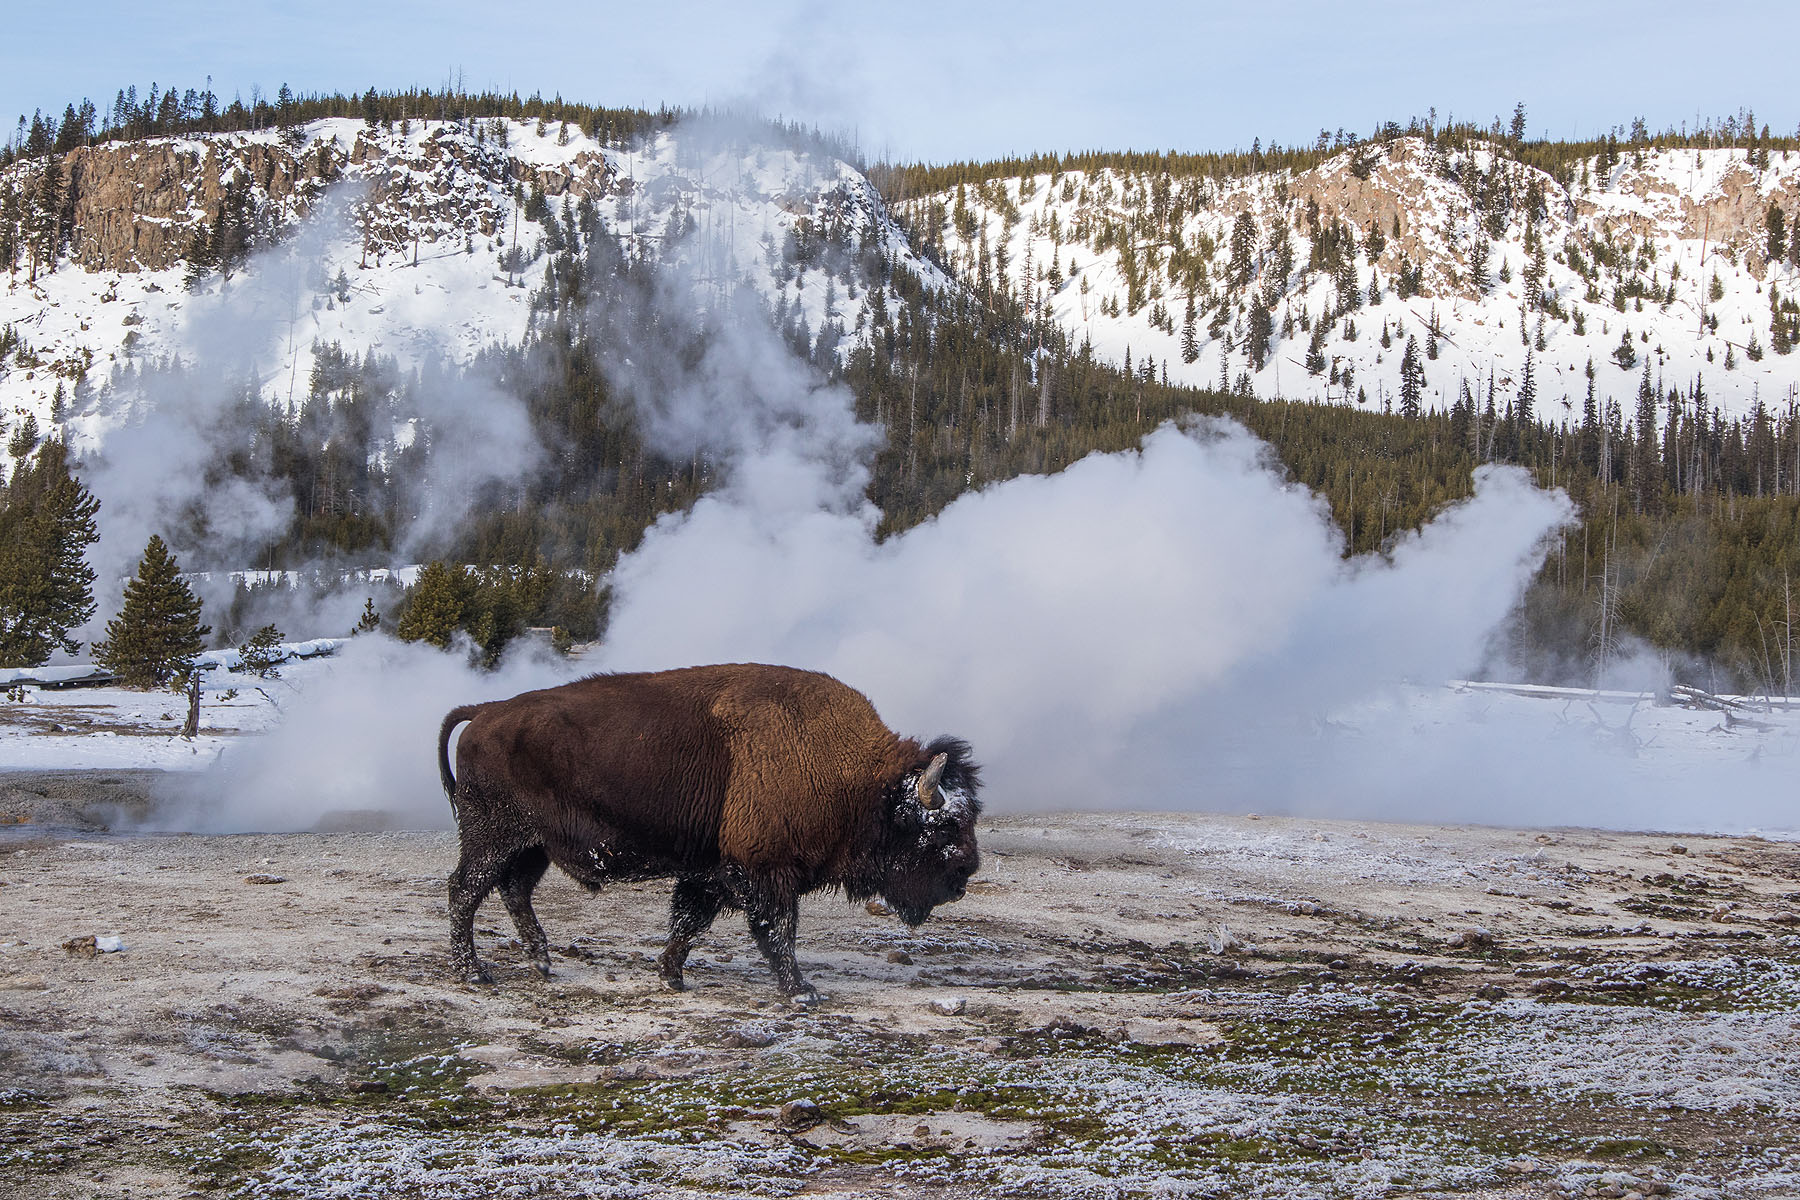 Bison in geyser field, January 2021.  Click for next photo.